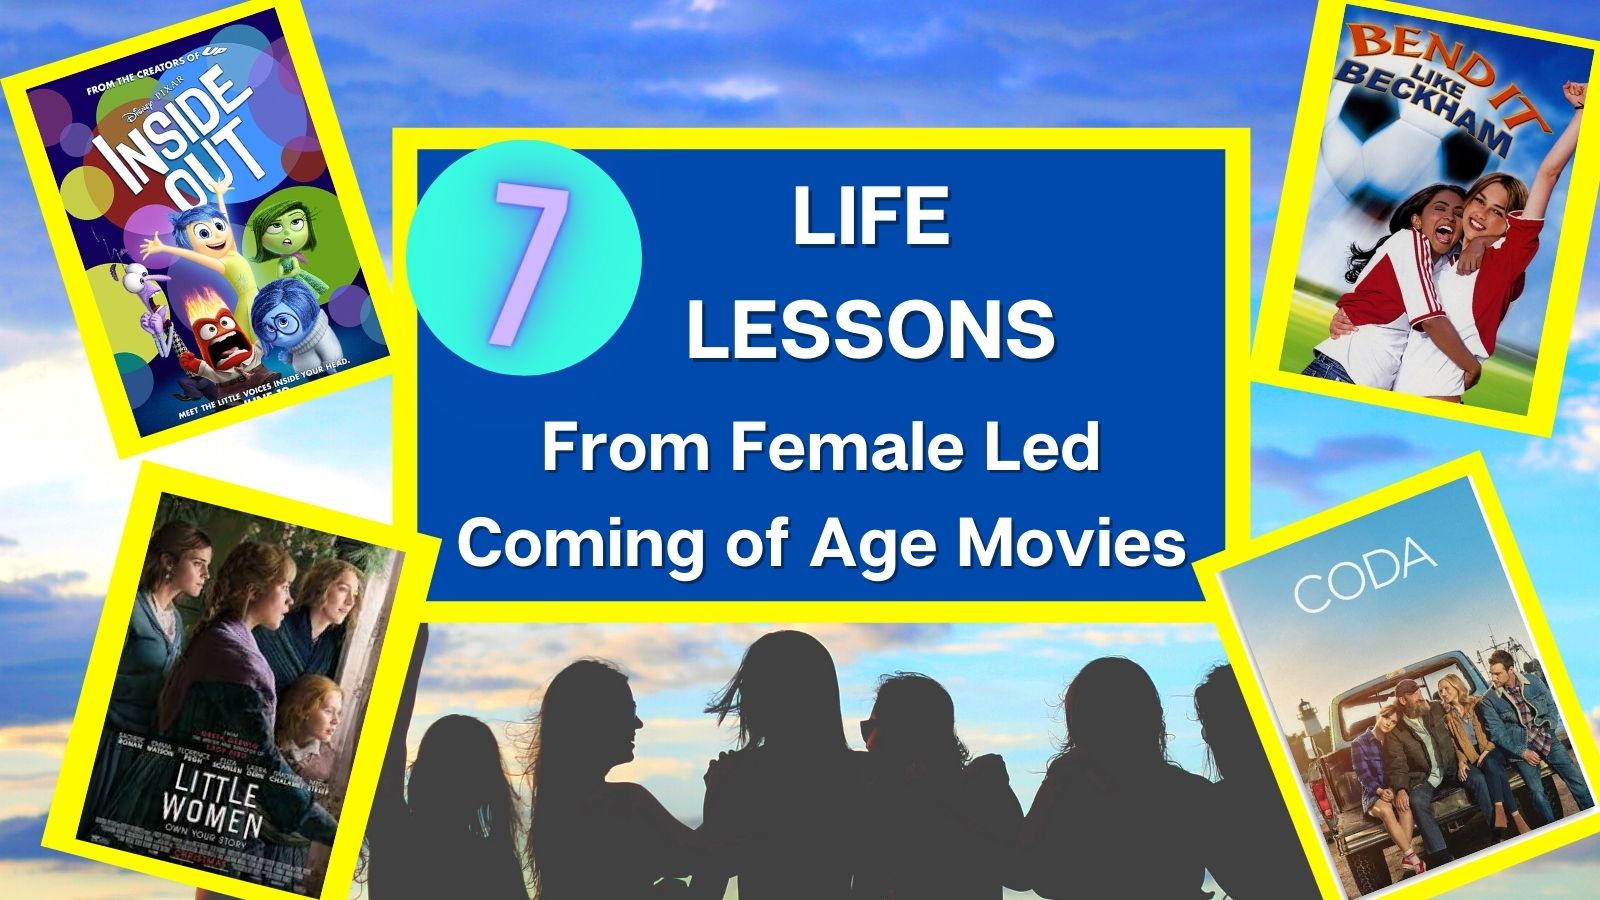 Lessons from coming of age moviews with female leads